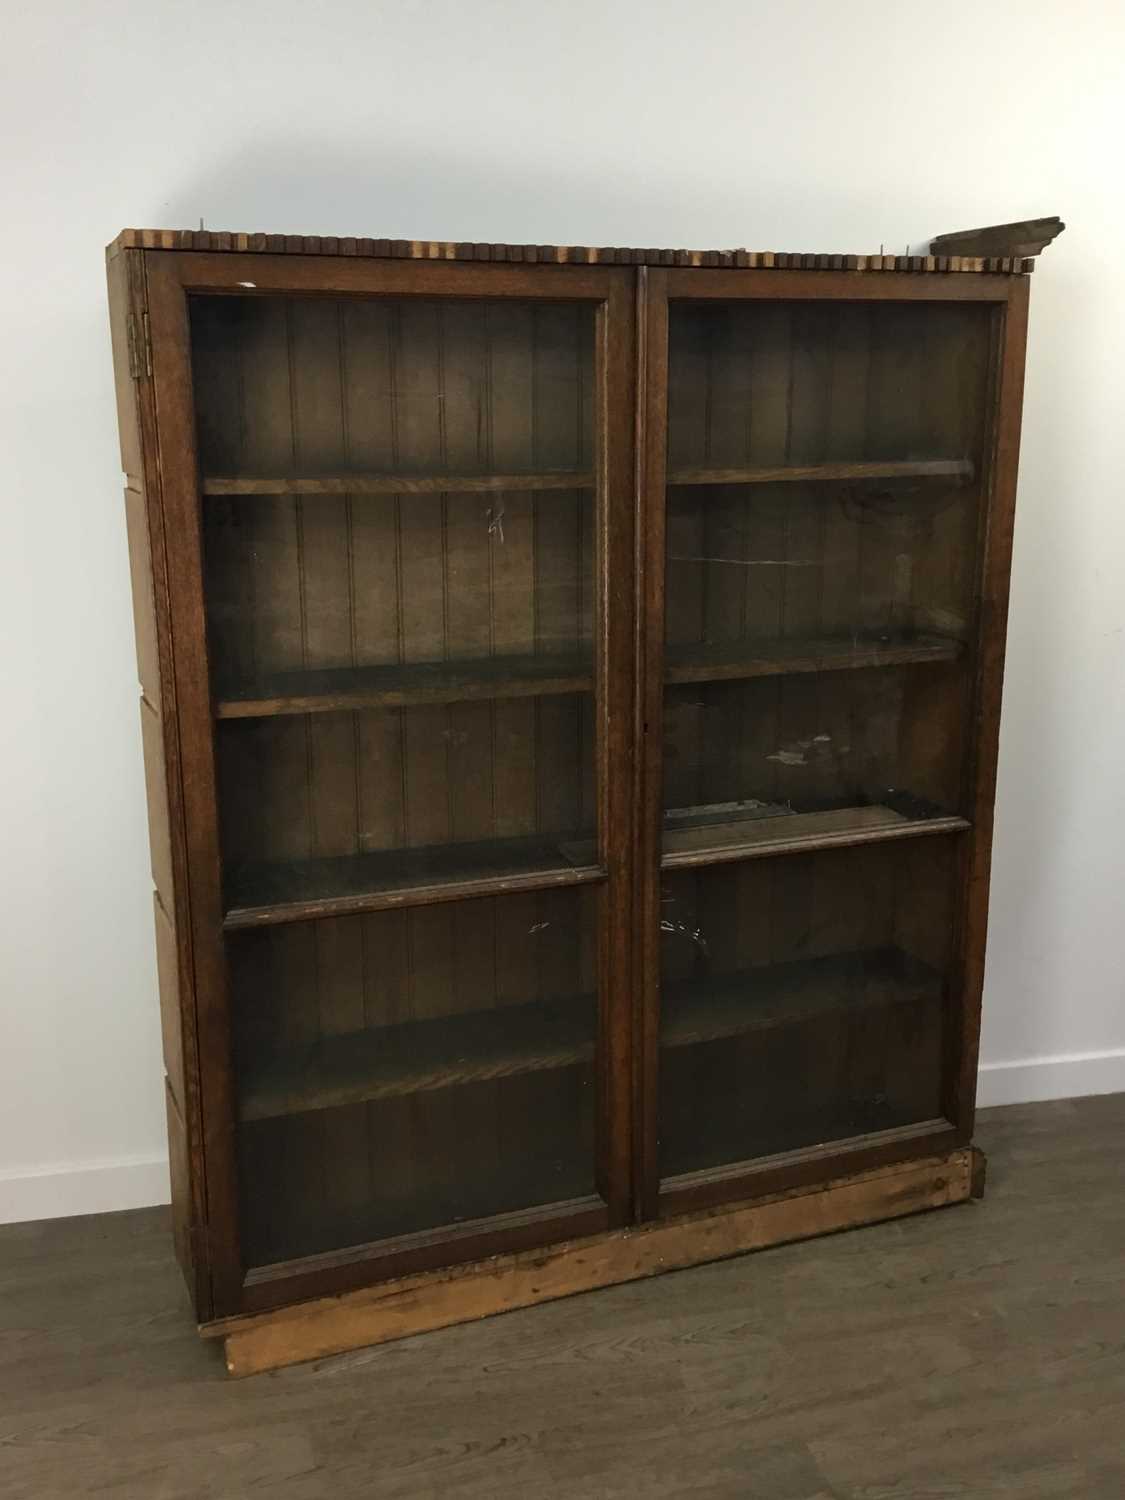 VICTORIAN OAK LIBRARY BOOKCASE - Image 4 of 6